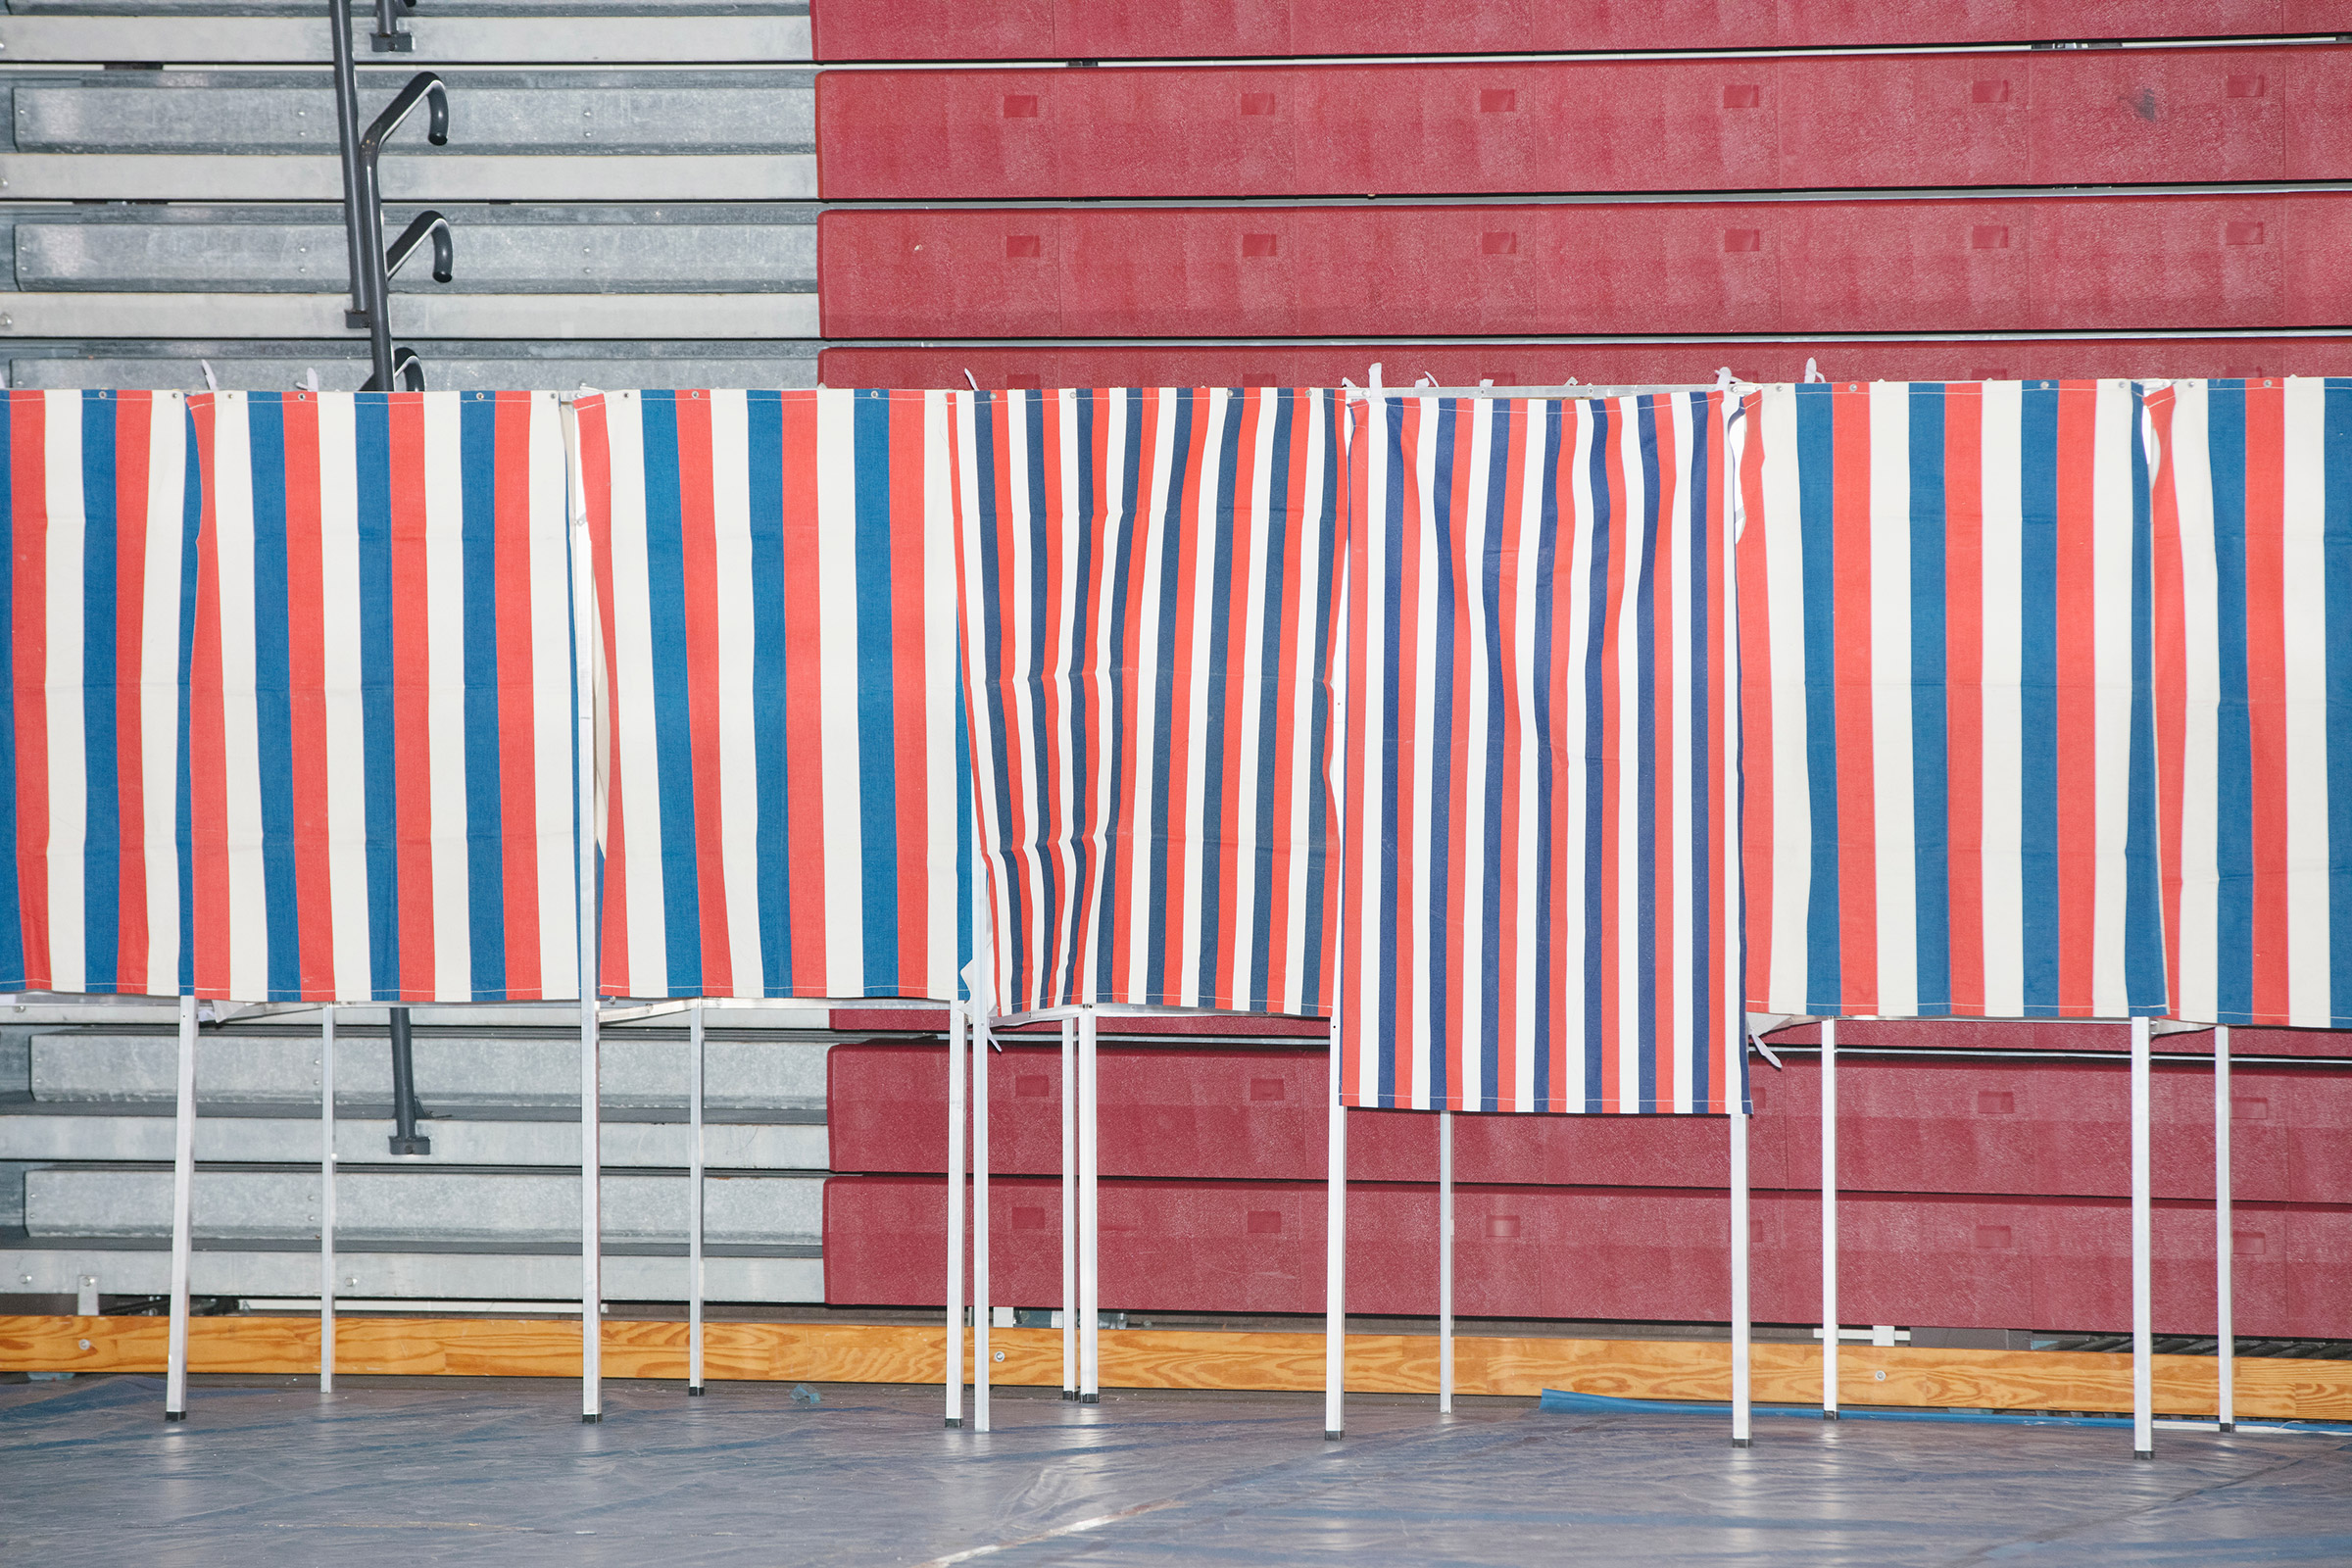 Voting booths stand empty during the New Hampshire Presidential Primary at Bedford High School in Bedford, N.H., on Feb. 11, 2020. (M. Scott Brauer for TIME)